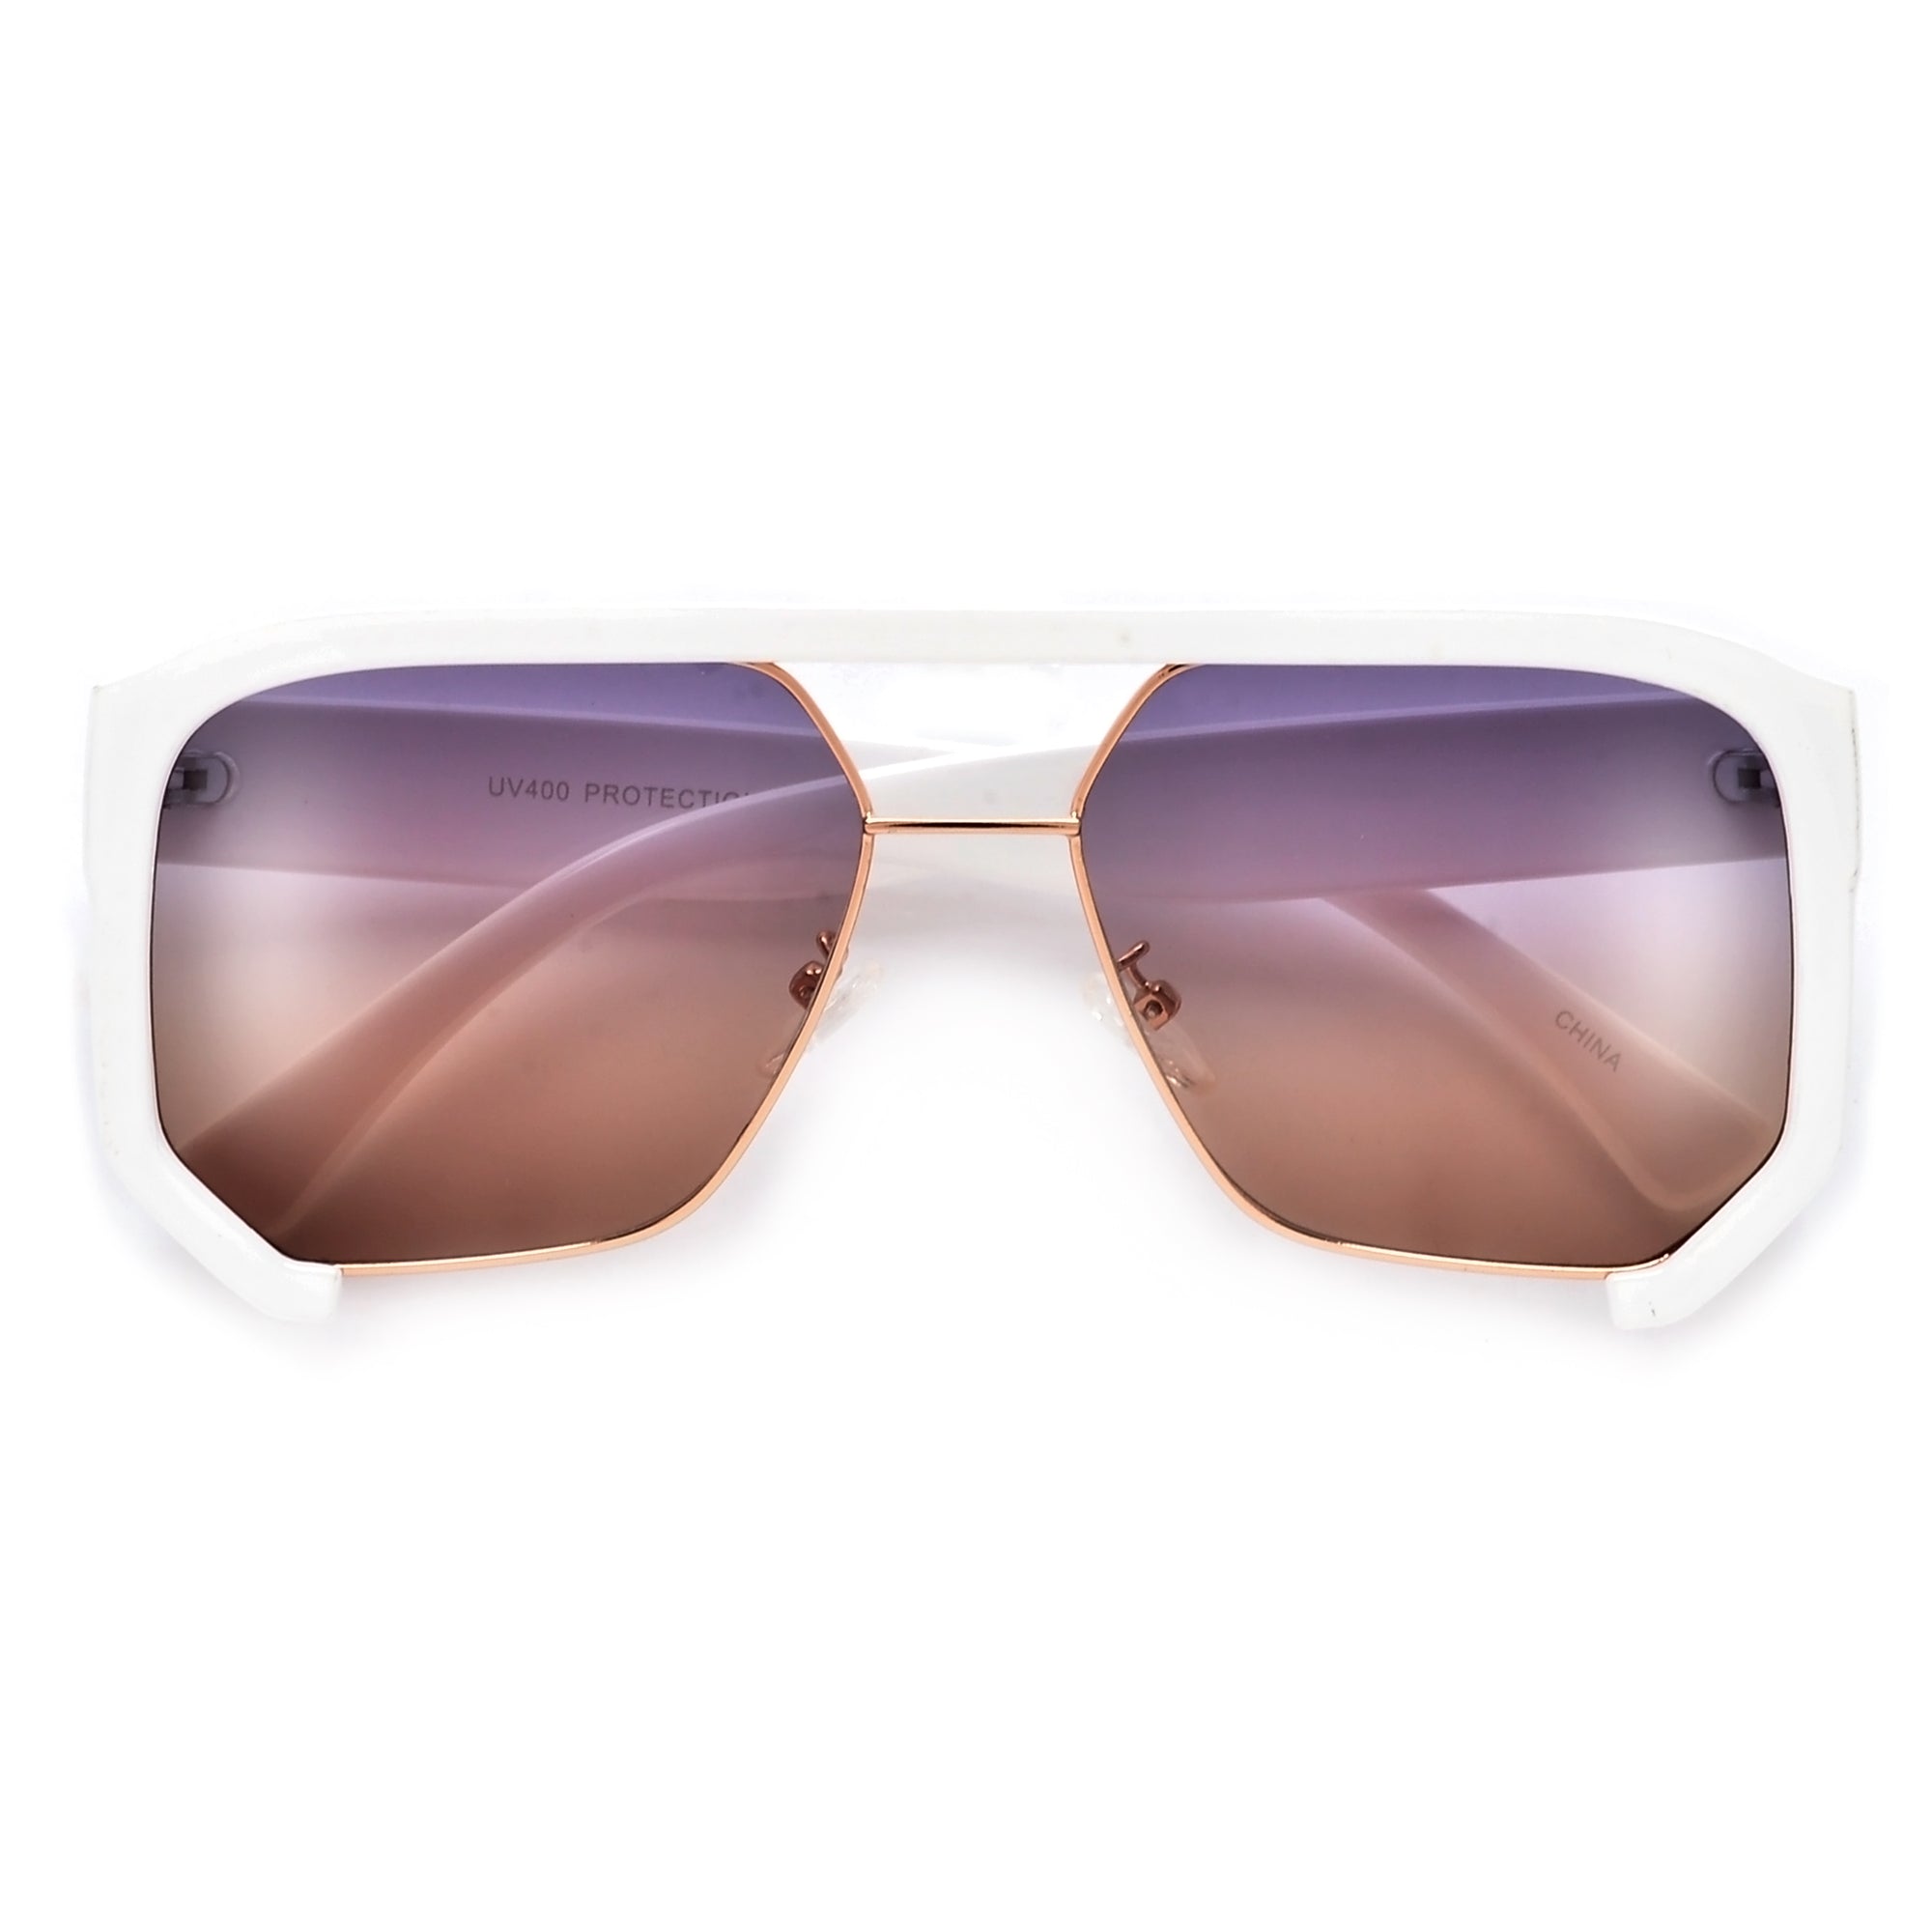 Louis Vuitton Pink The Party Square Aviator Sunglasses